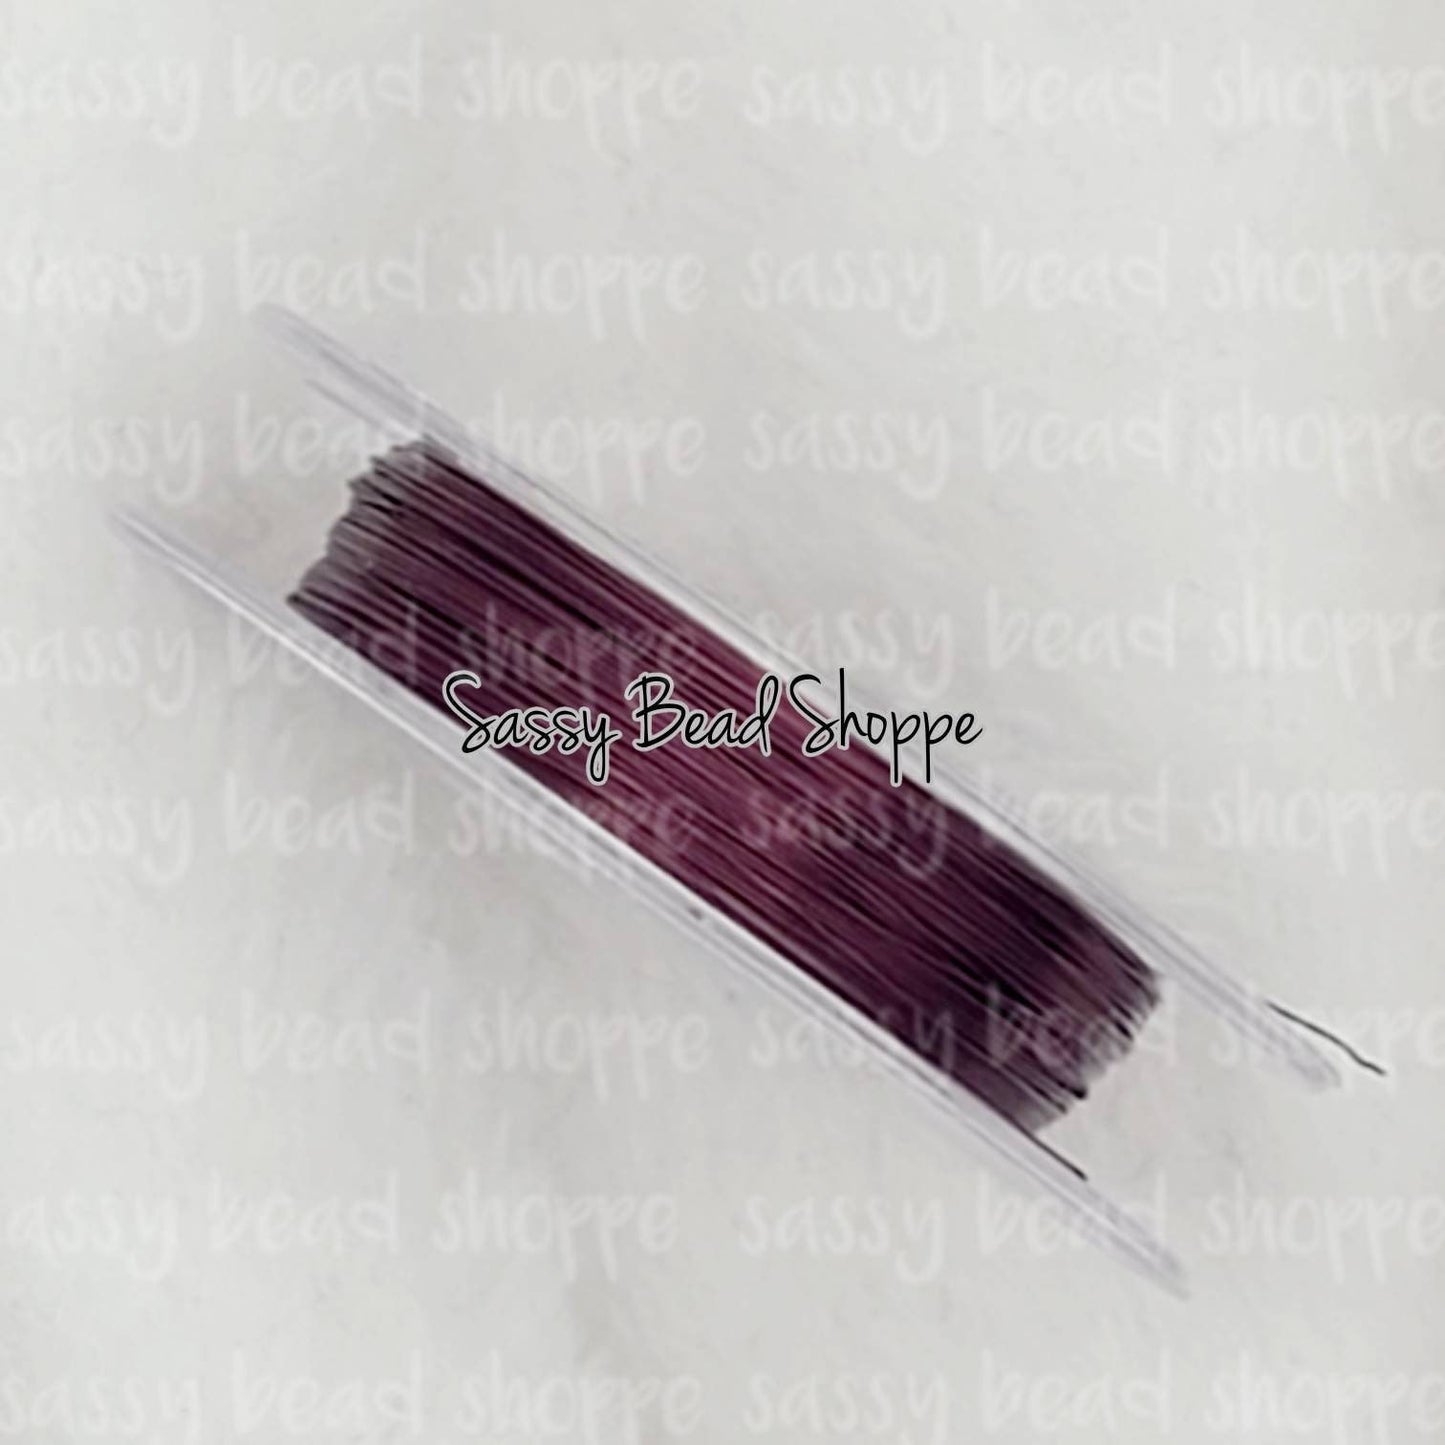 Burgundy Beading Wire 0.3mm- 10 Meters Copper Wire